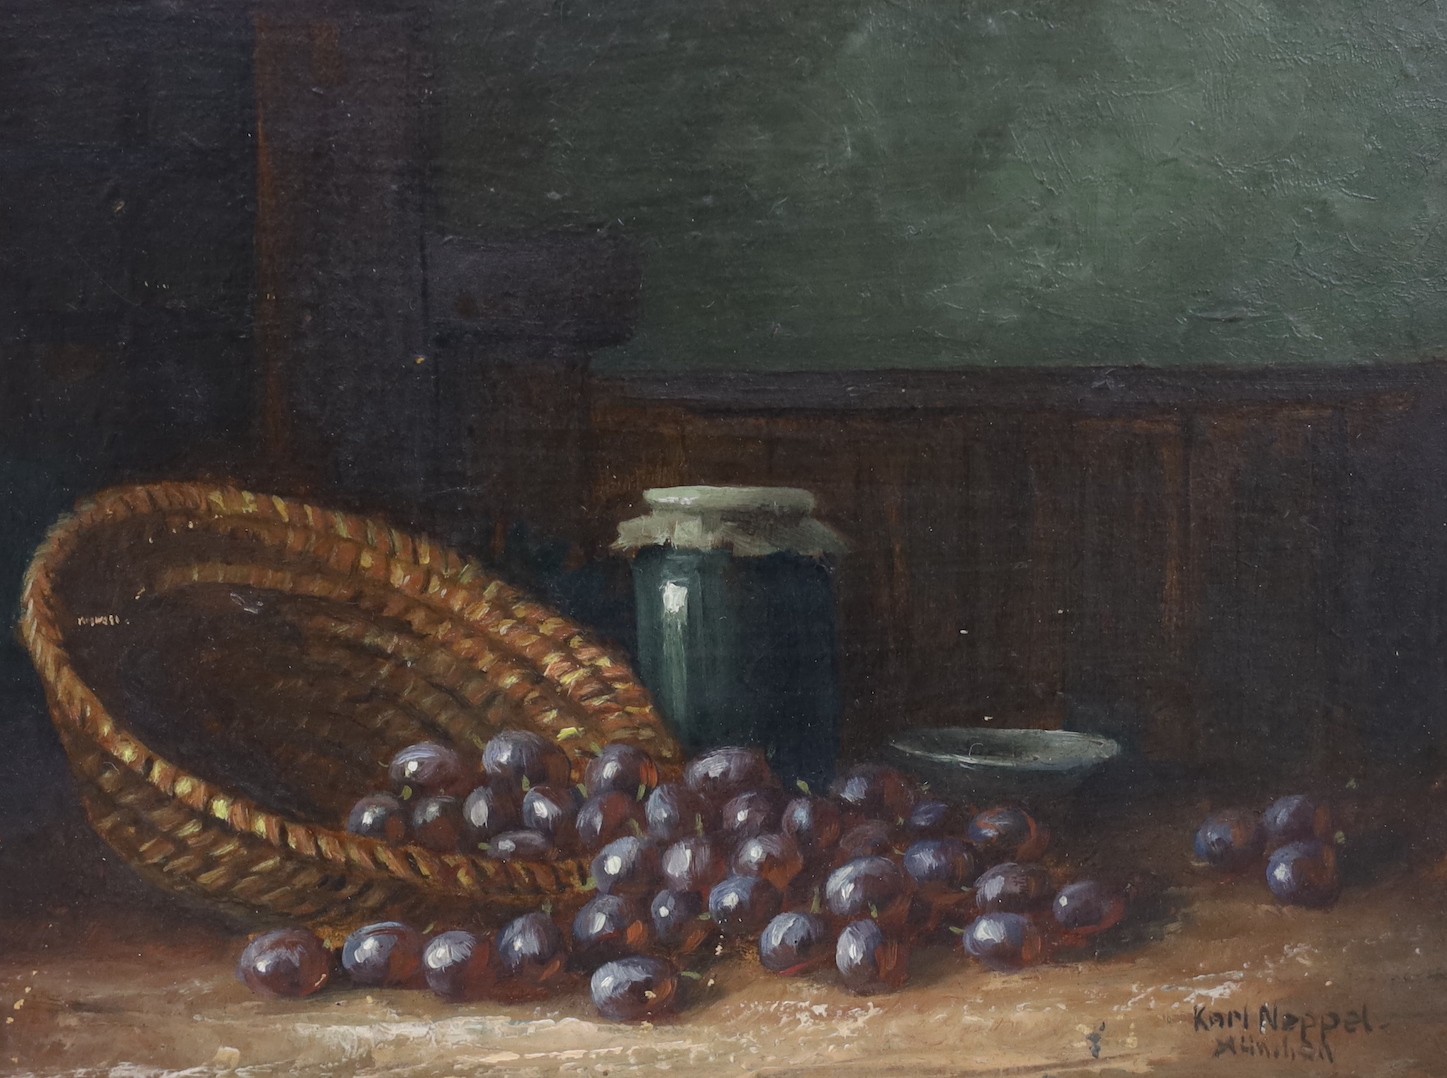 Karl Neppel (German, 1883-1961), oil on board, Still life of grapes on a table top, signed, 13 x 17.5cm